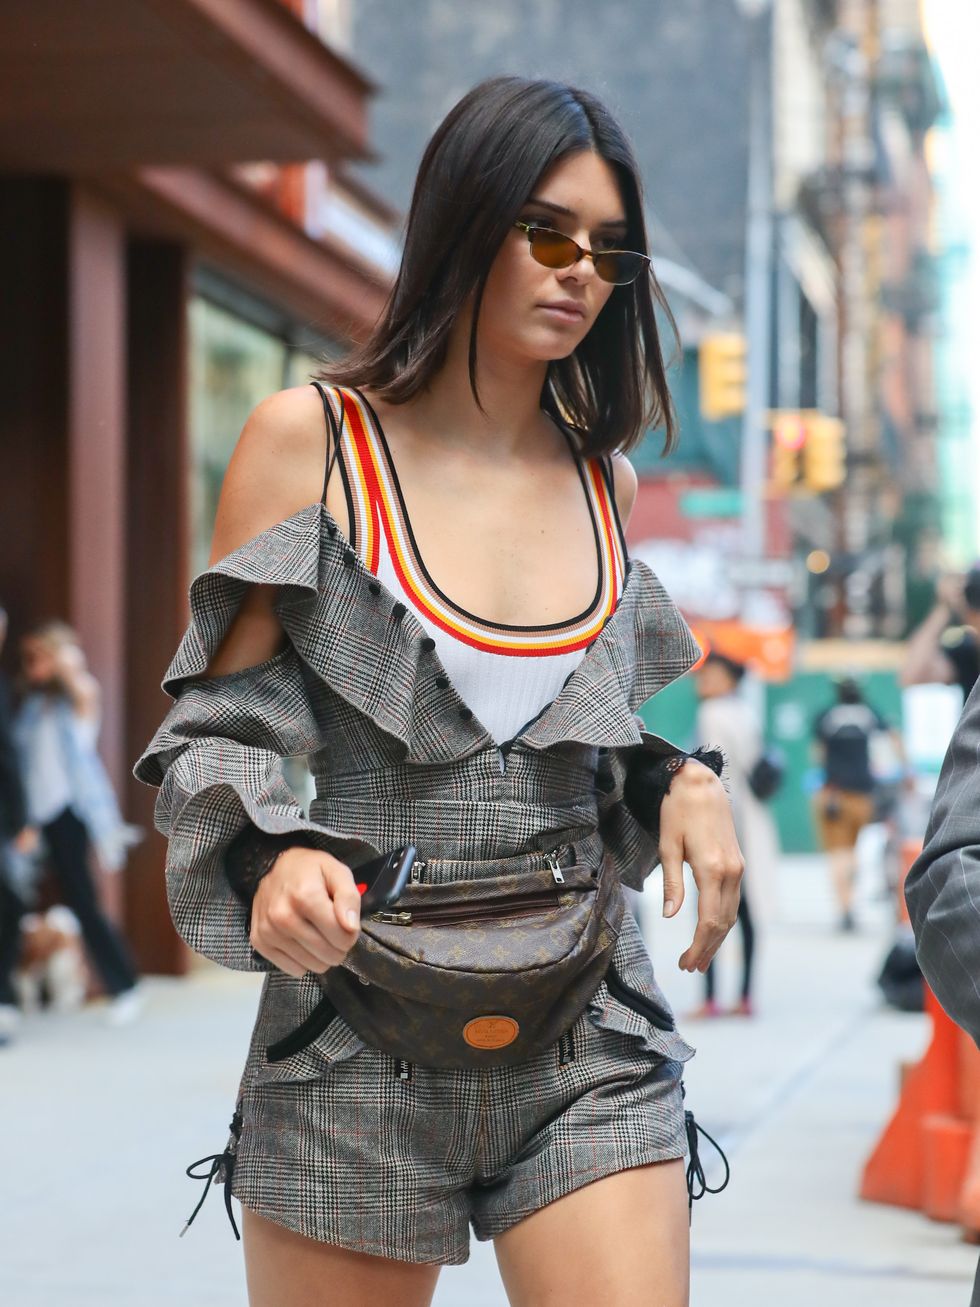 Fanny Pack Trend - '90s Style Comeback